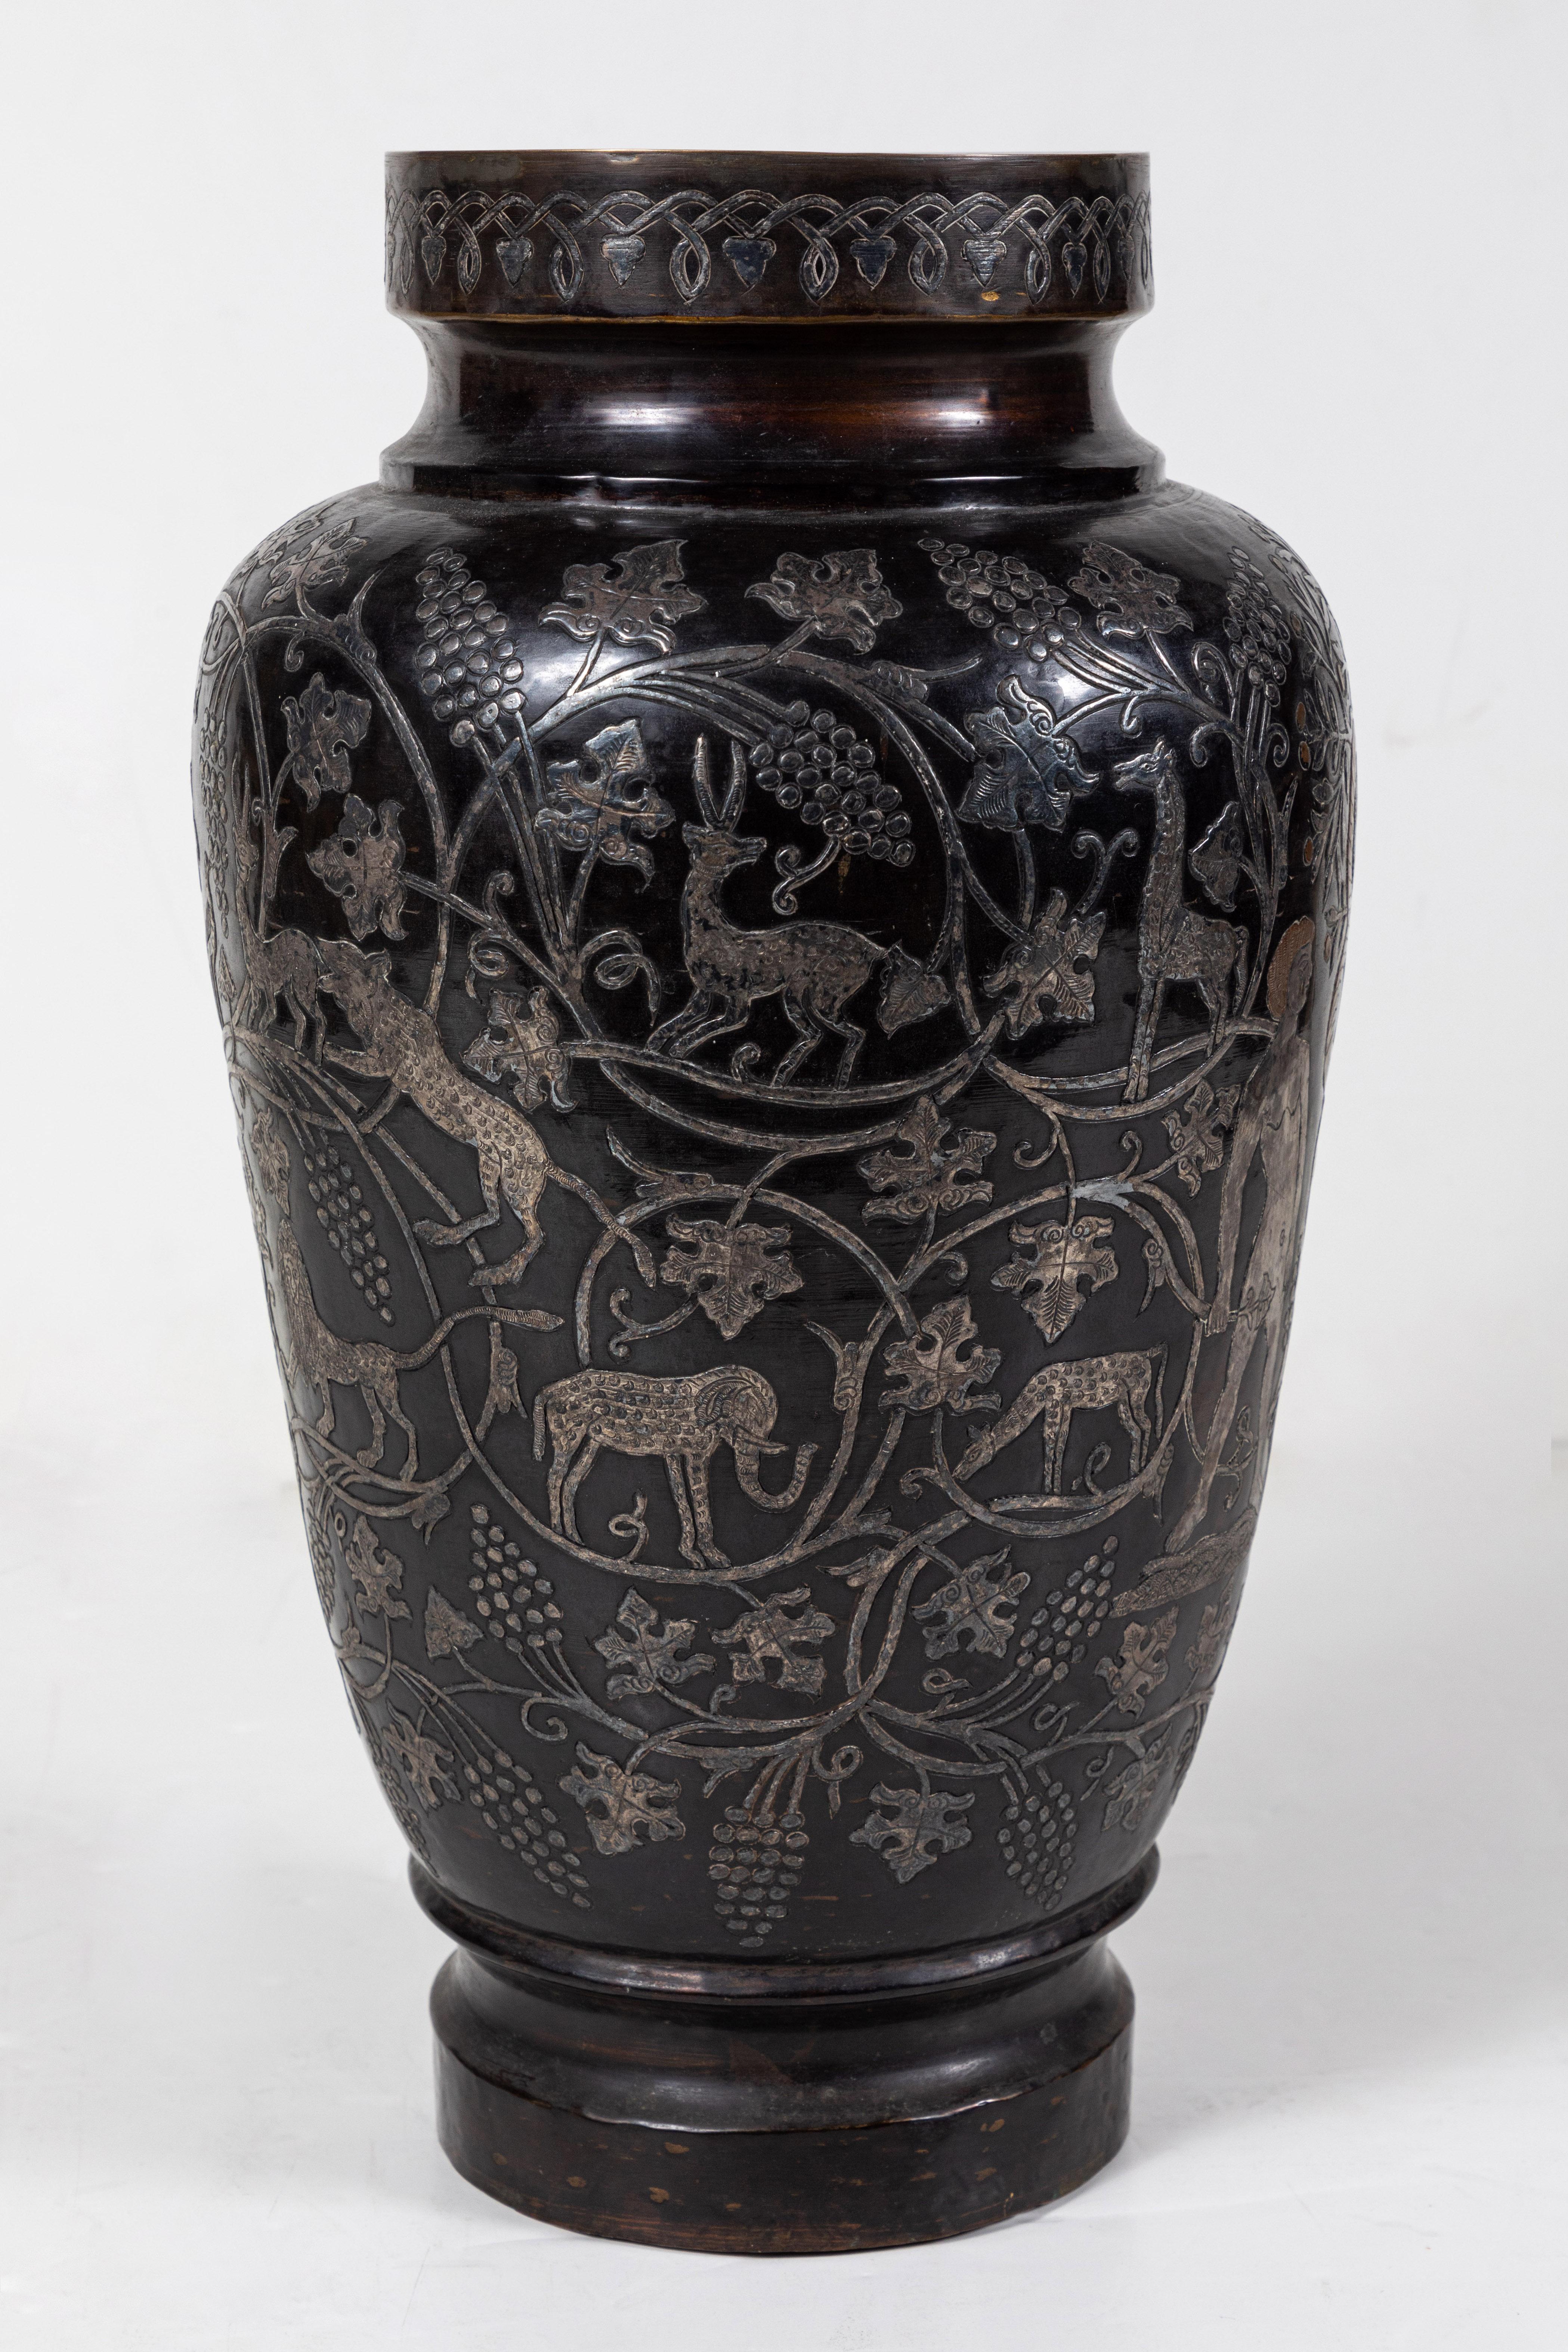 Striking, richly detailed, chased metal vase showing scenes from the Garden of Eden, including the Tree of Life surrounded by a coiled serpent. The whole surrounded by scrolling, fecund grape vines with a variety of animals. 